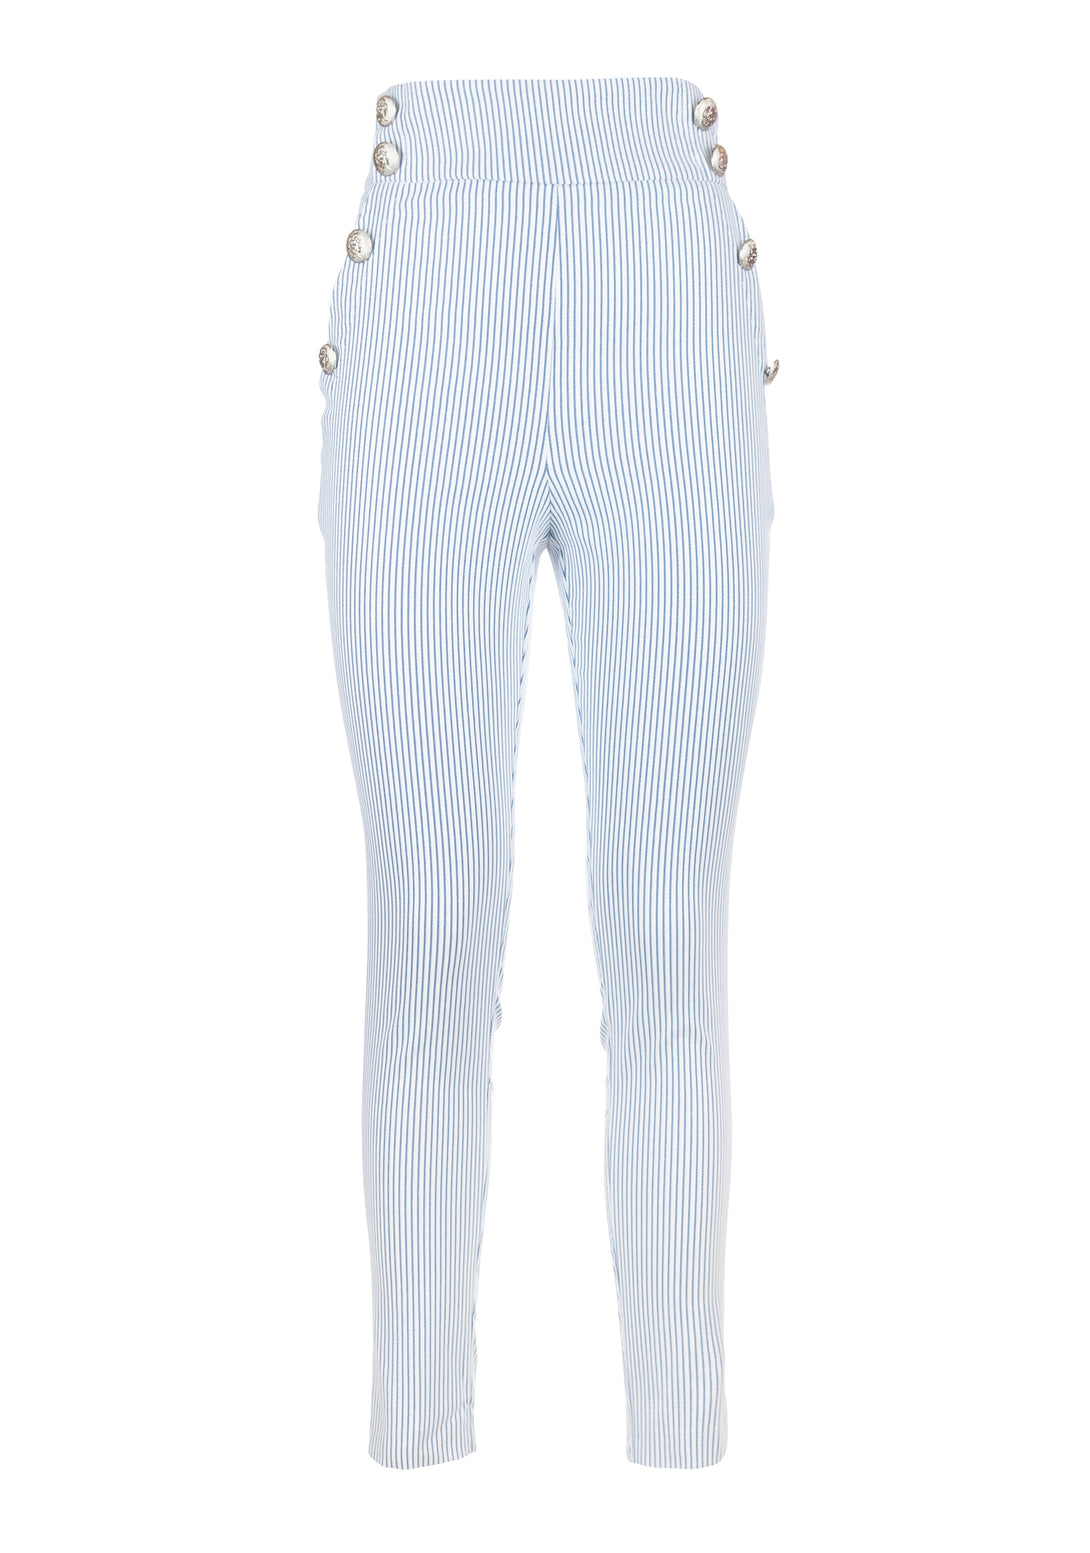 Pant skinny fit with stripes